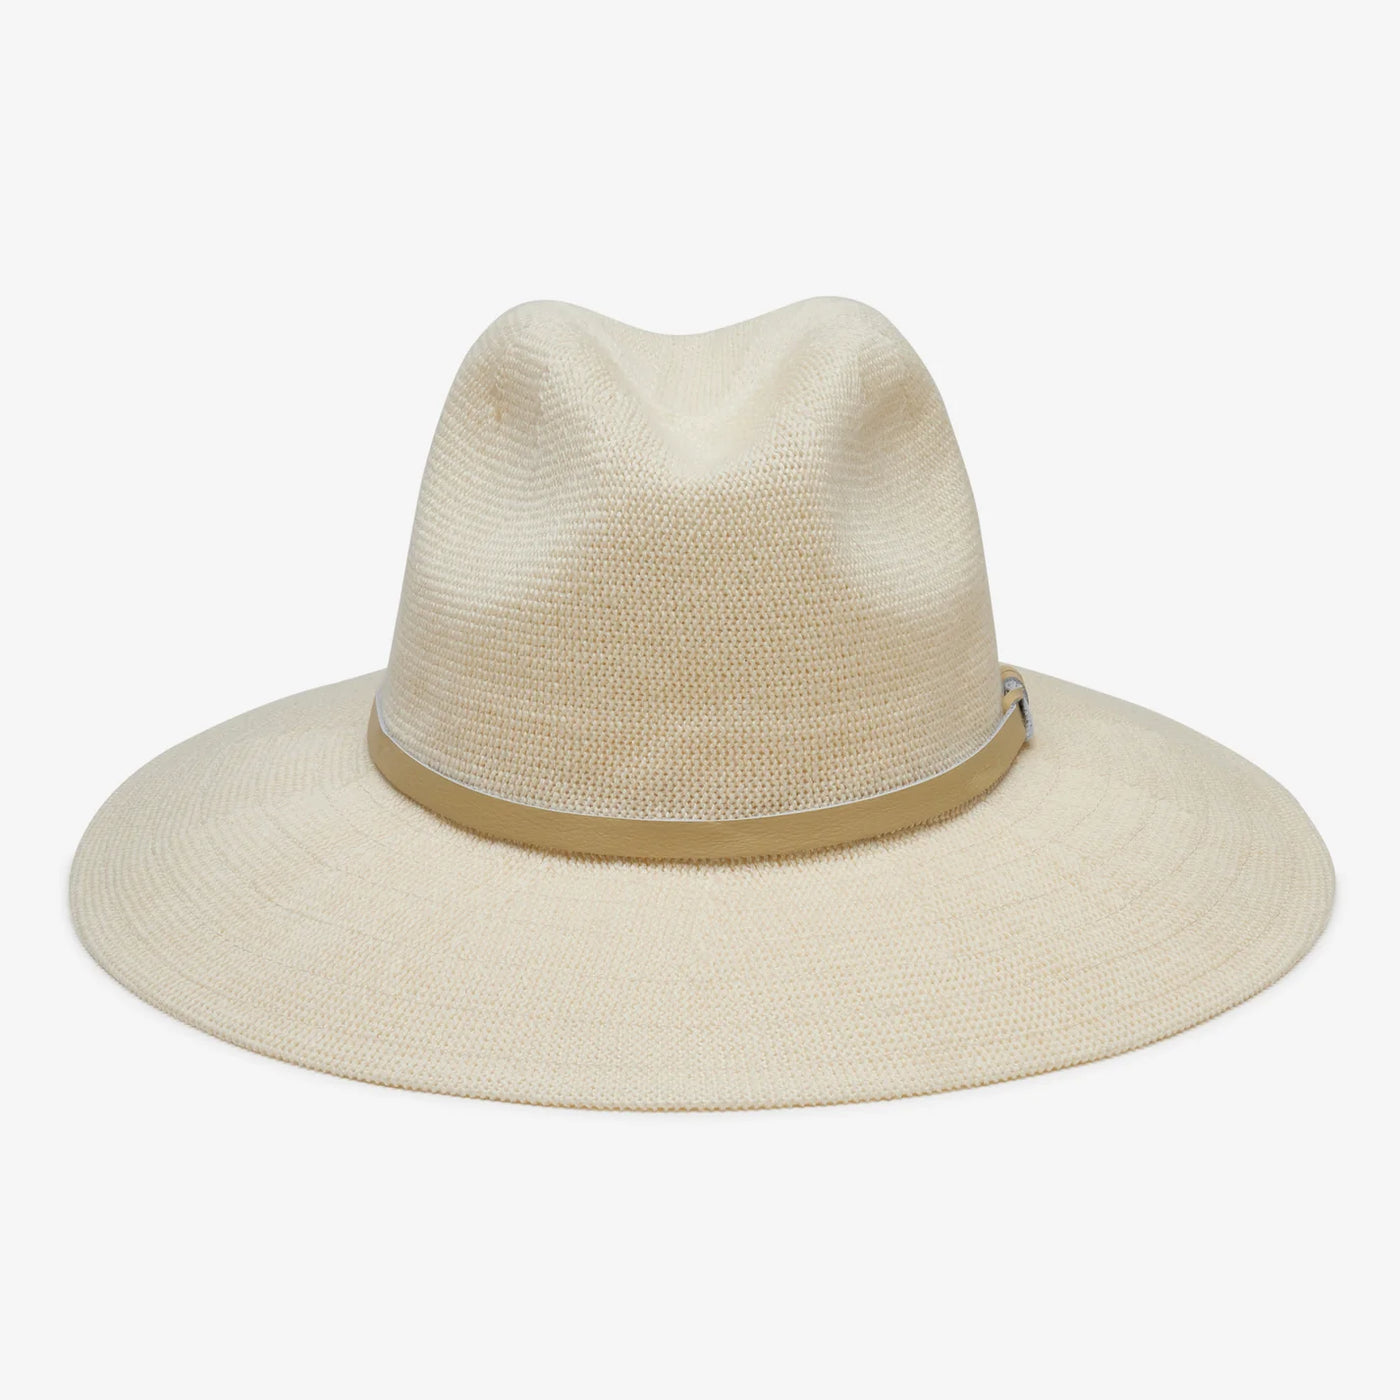 WINONA HAT IN IVORY - Romi Boutique